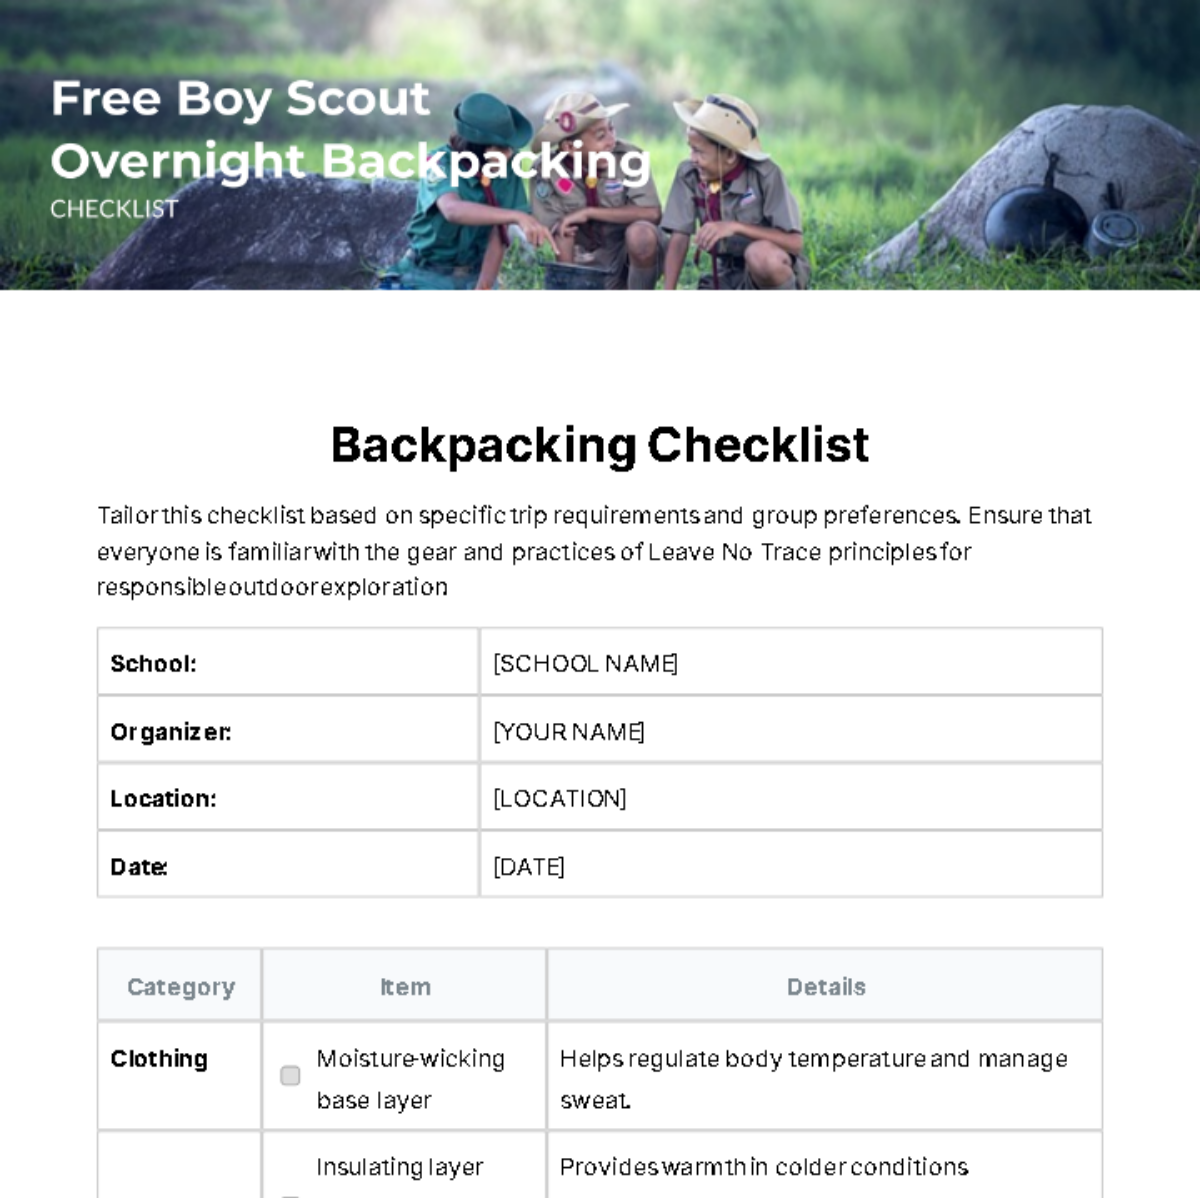 Free Boy Scout Overnight Backpacking Checklist Template